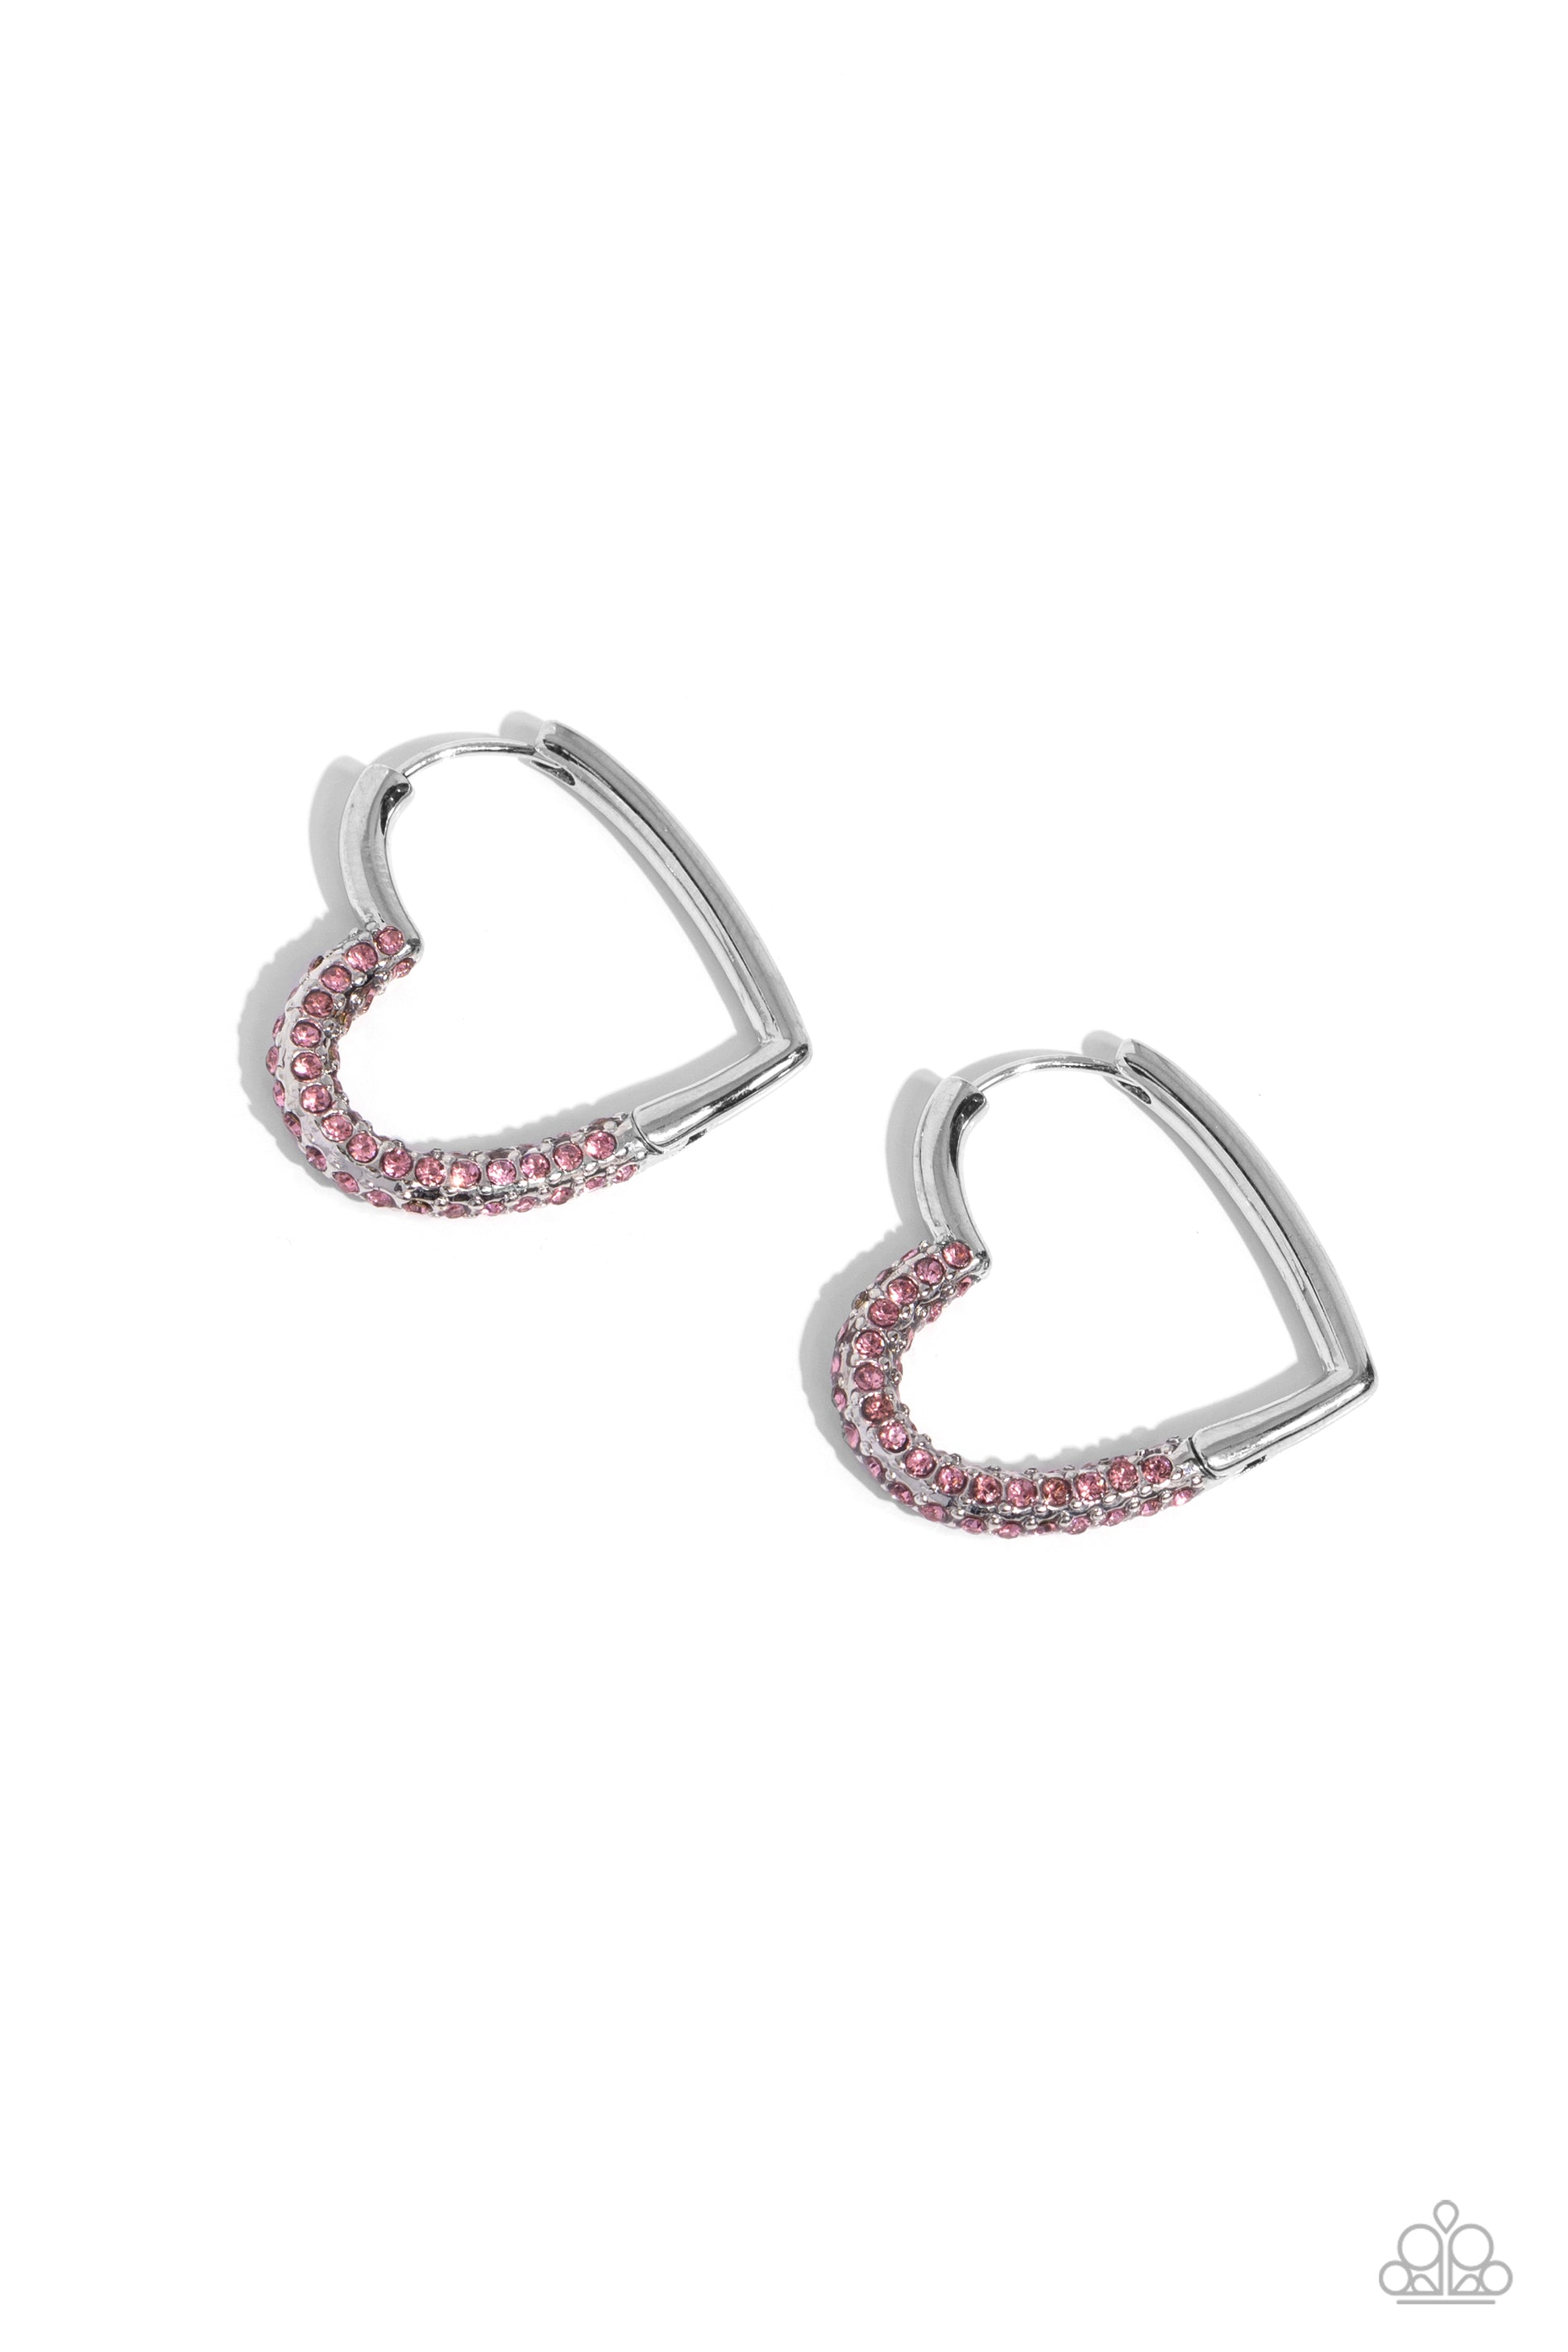 Be Mine, Valentine? Pink Heart Hinge Hoop Earring - Paparazzi Accessories  Embossed along one curve of a sleek silver heart-shaped frame, row after row of glittery pink rhinestones curls around the ear, leaving a lasting romantic impression. Earring attaches to a standard hinge closure fitting. Hoop measures approximately 1 1/8" in diameter.  Sold as one pair of hinge hoop earrings.  SKU: P5HO-PKXX-076XX